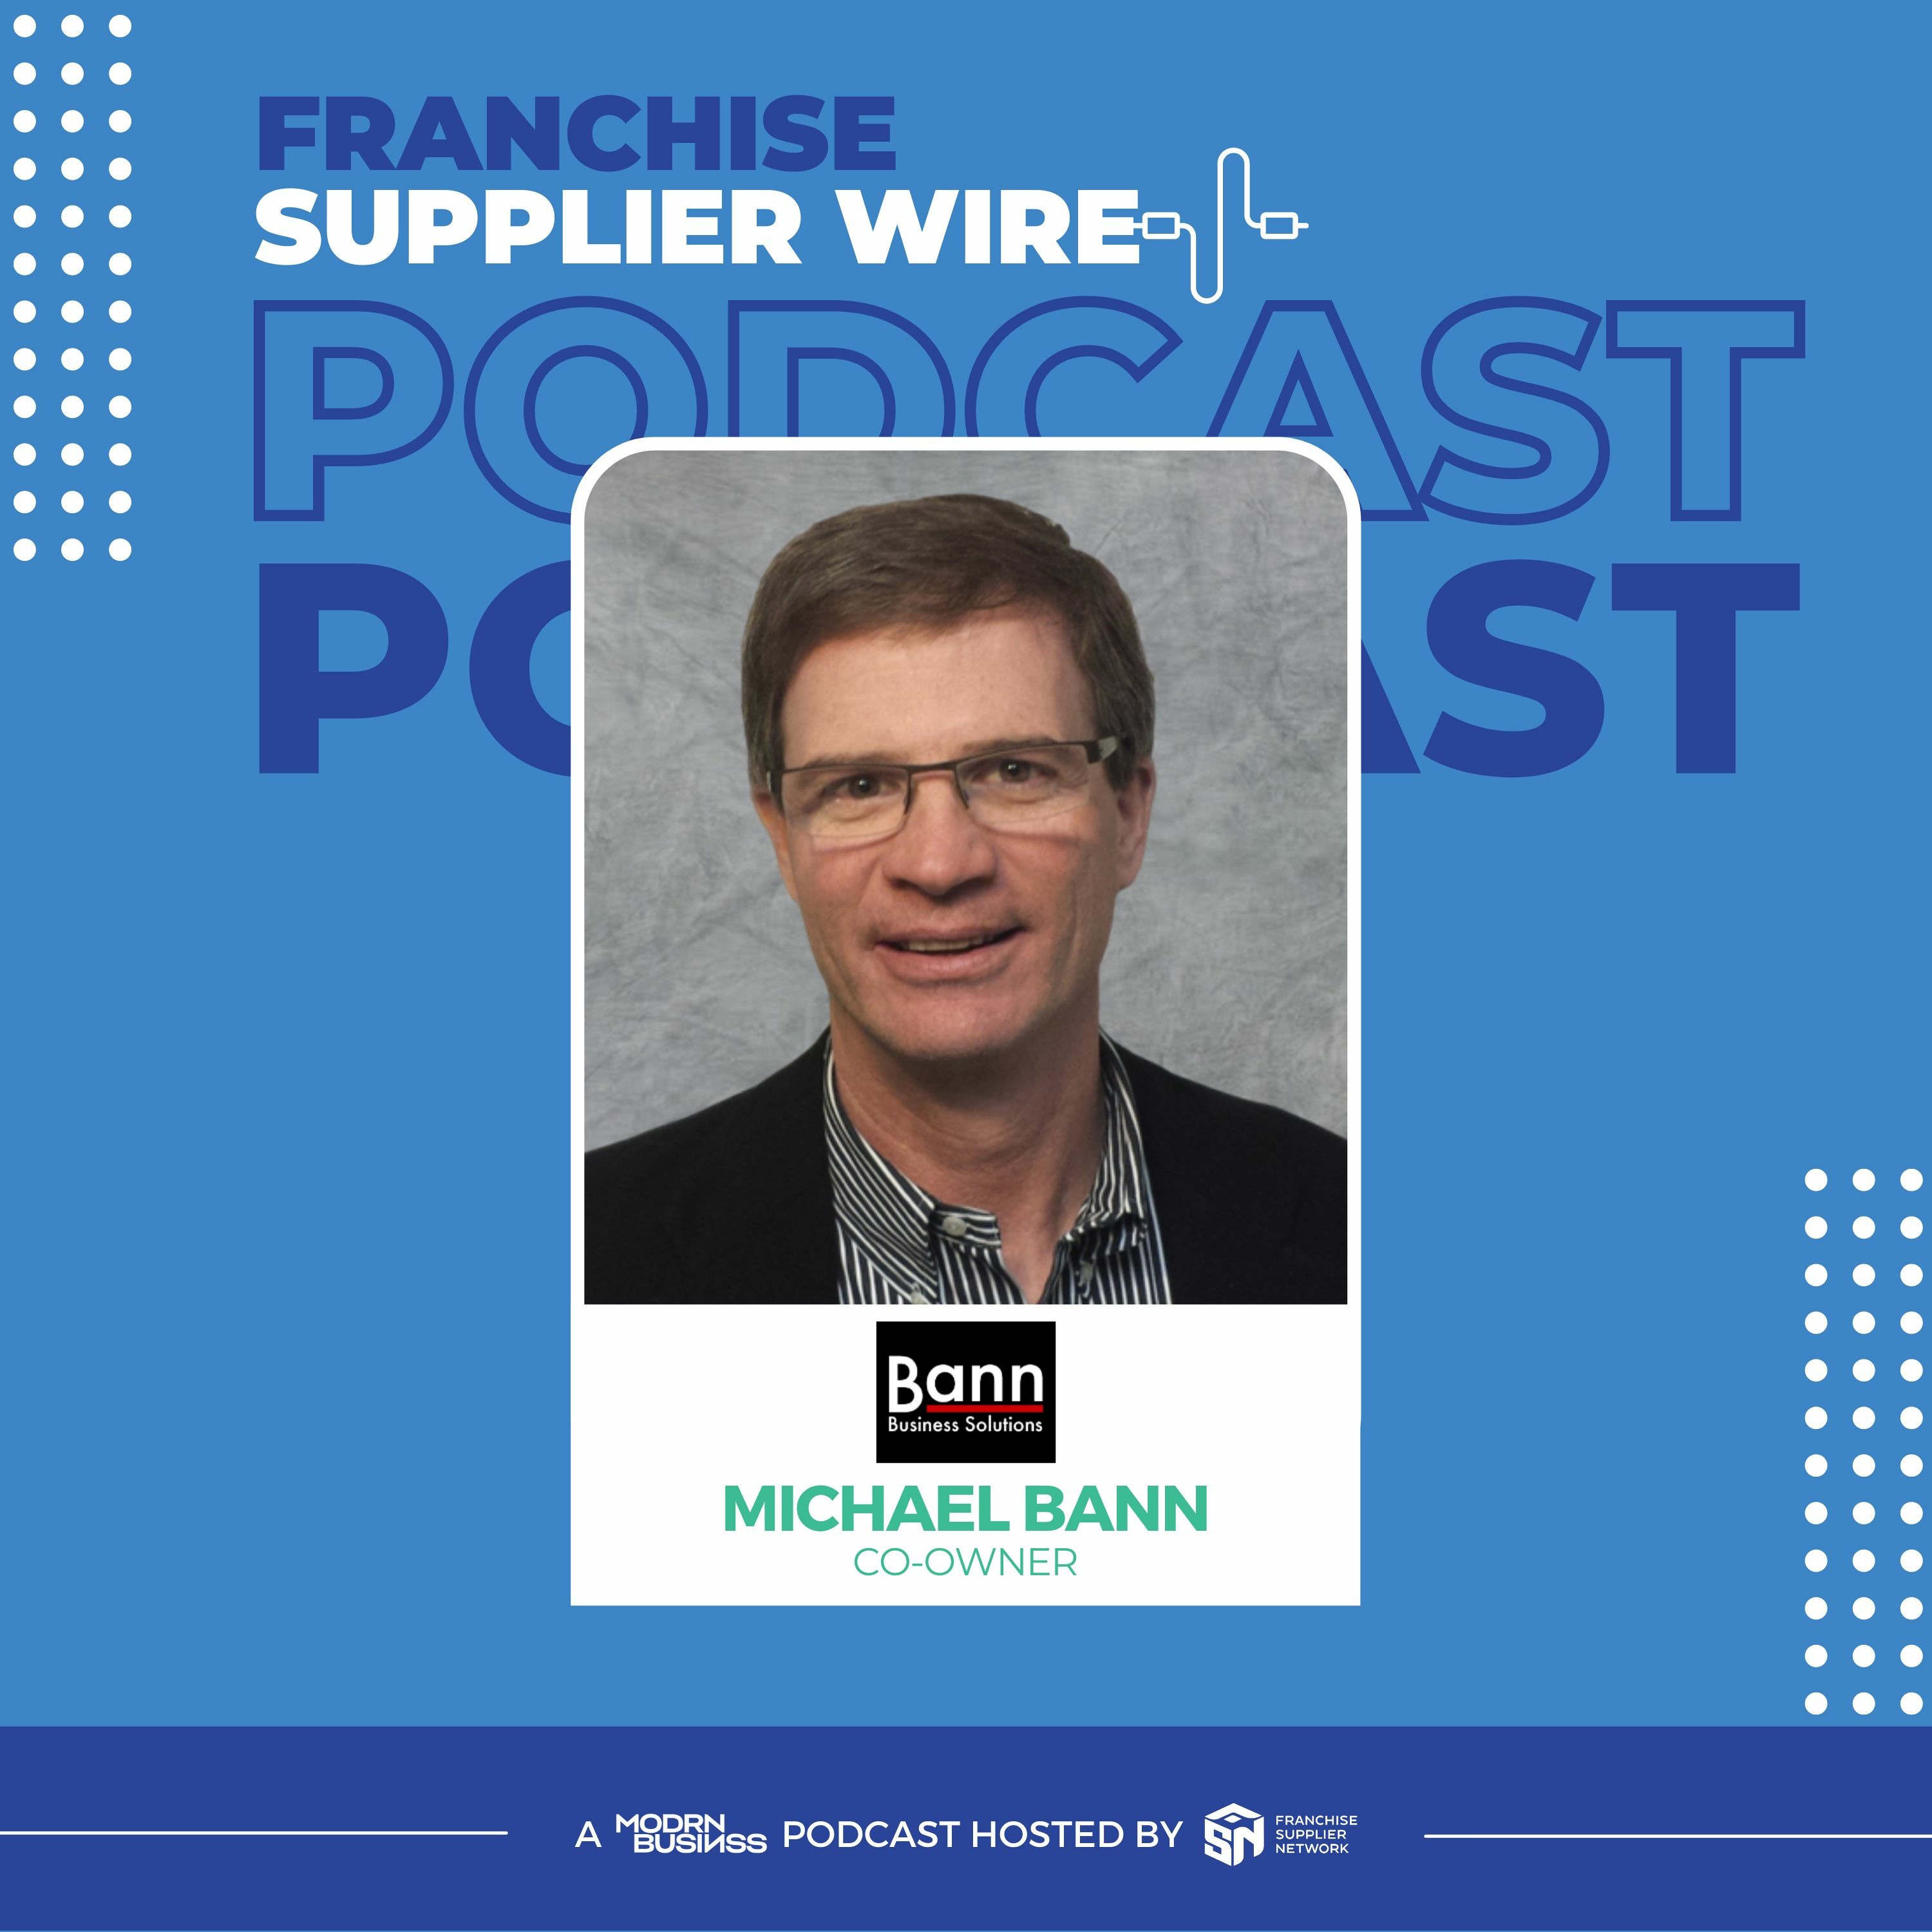 Supplier Wire 011:  Intent Data Marketing For Franchise Systems